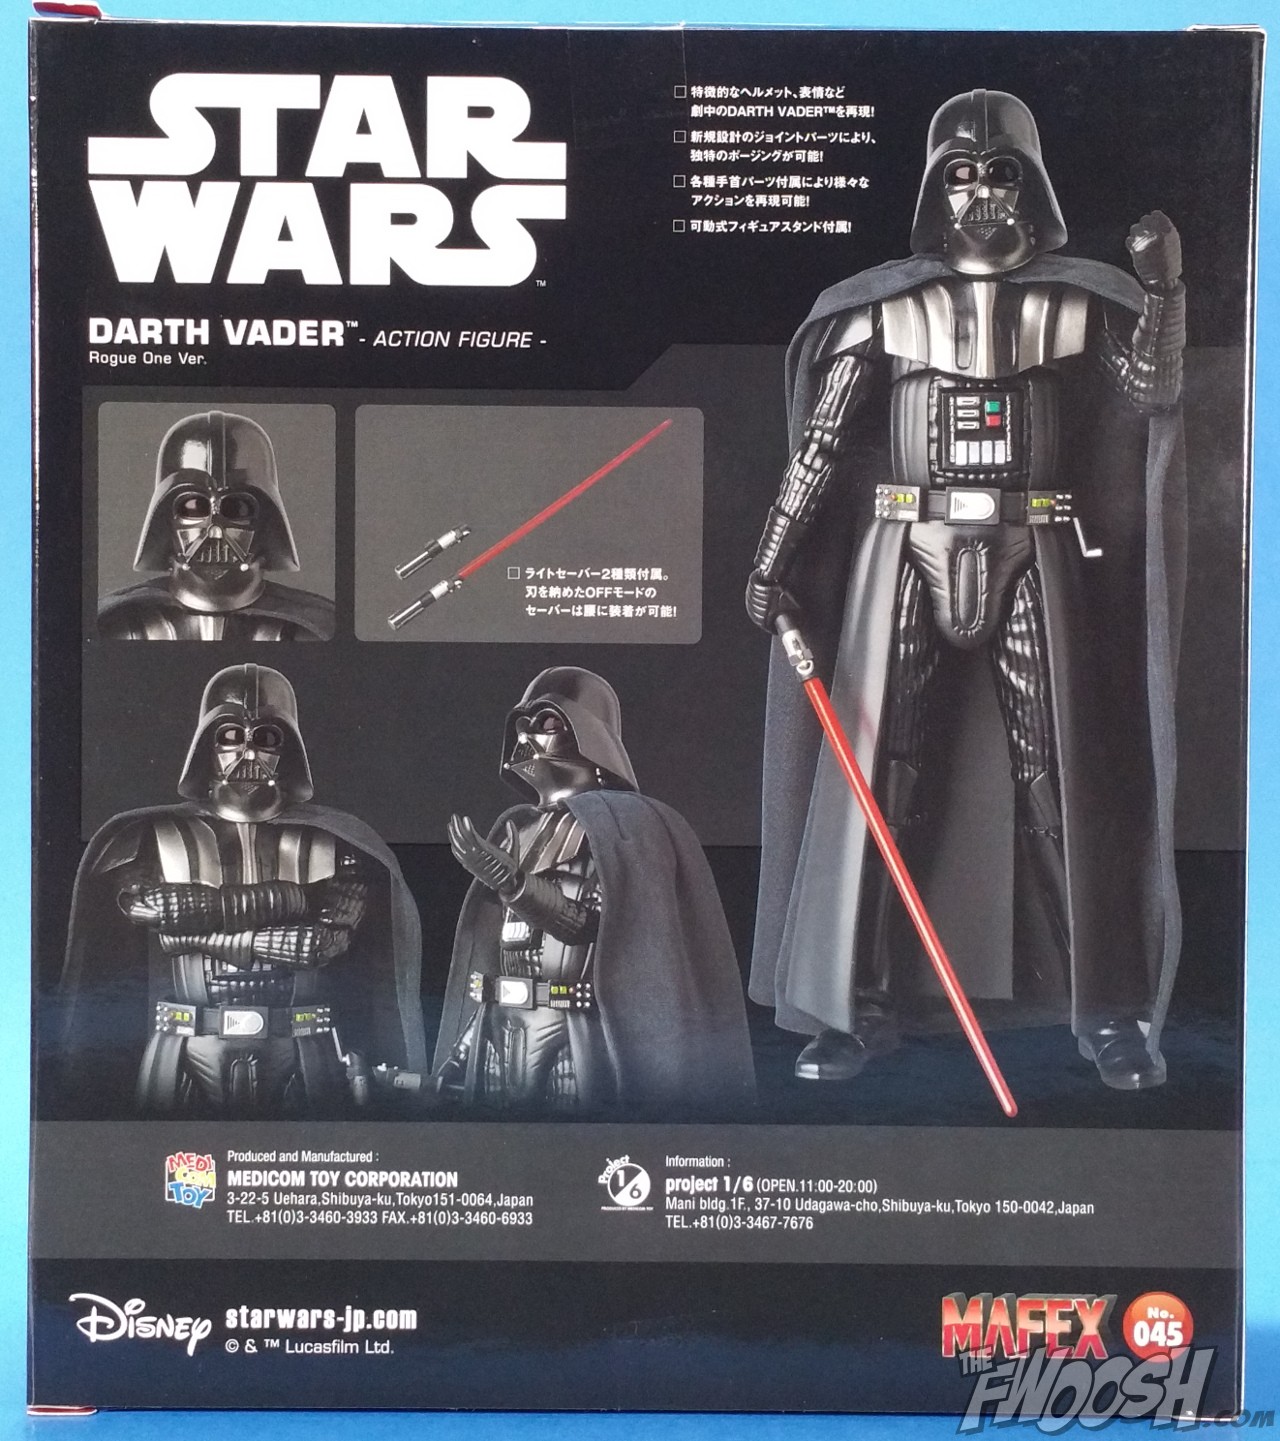 TM MAFEX DARTH VADER Rogue One Ver. 